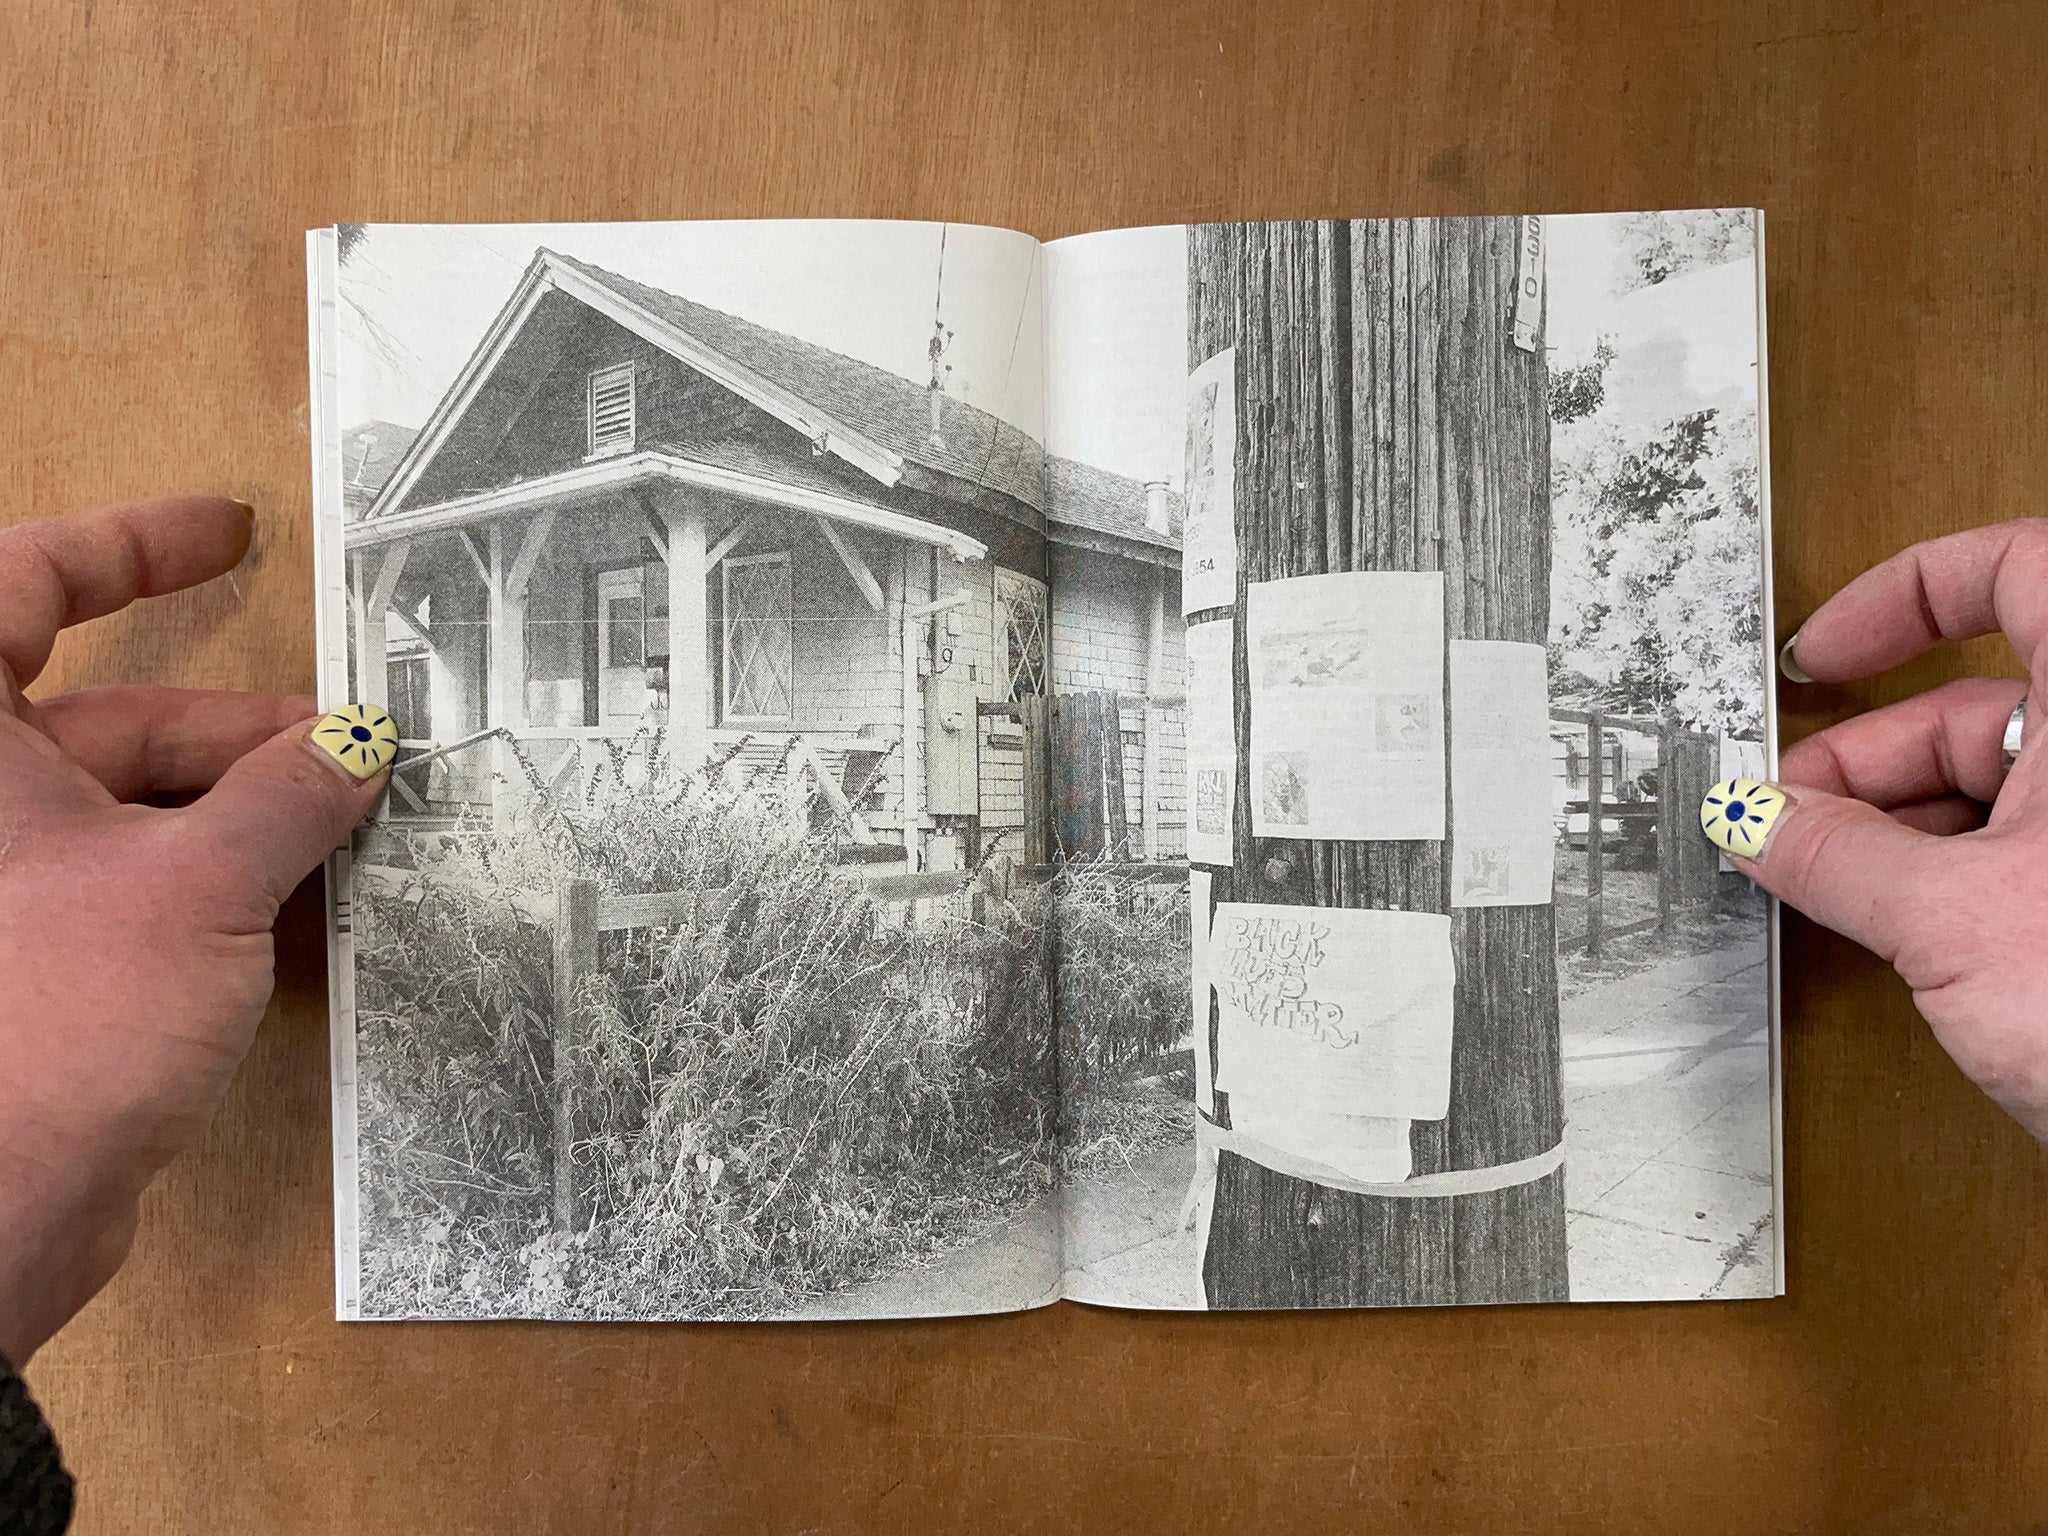 EMERYVILLE COOL FUN BOOKLET: CURRENT EDITIONS NO. 8 by Jessalyn Aaland